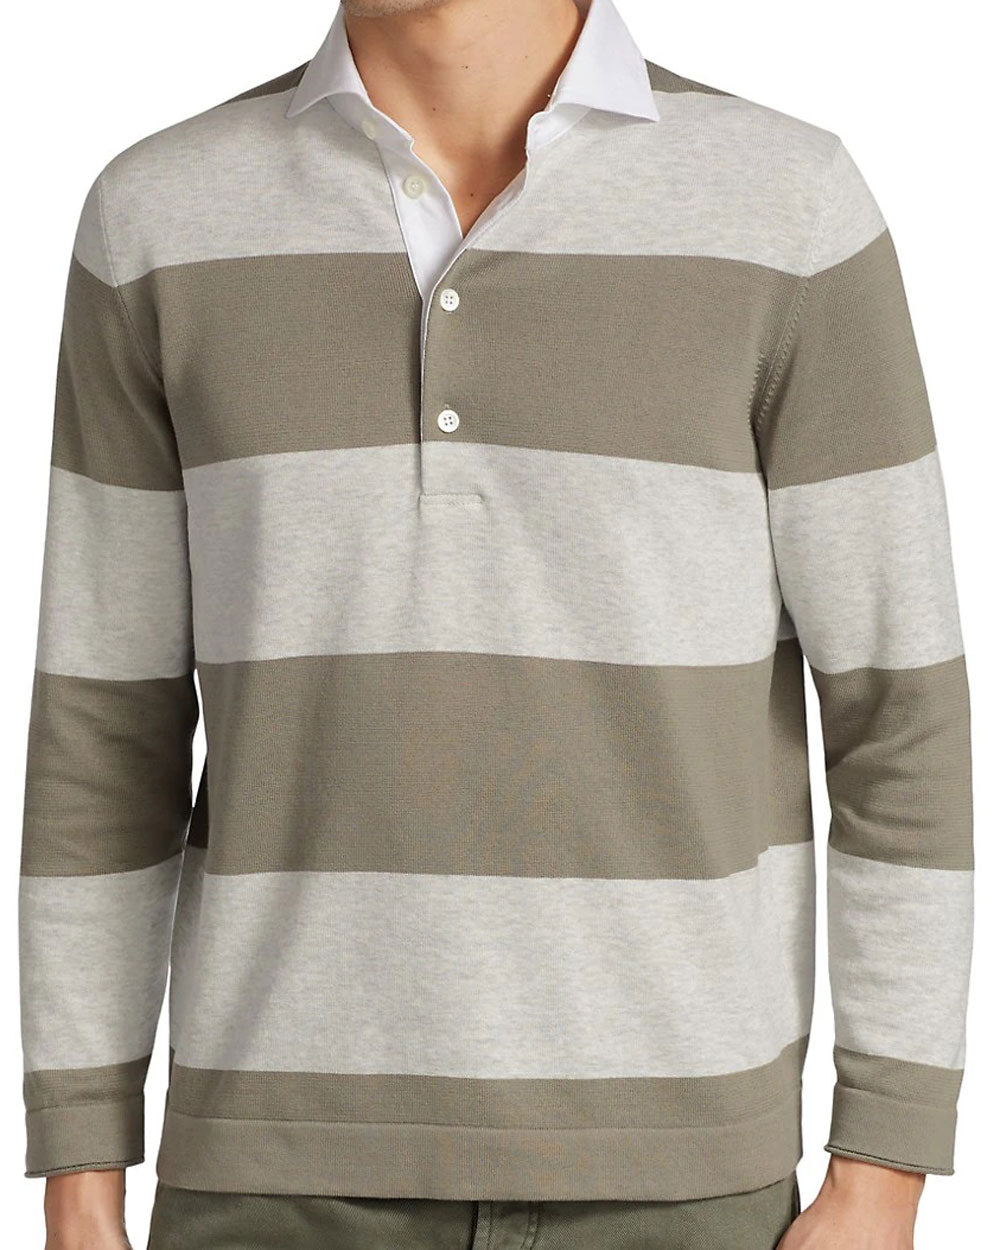 Grey and Army Green Striped Rugby Polo